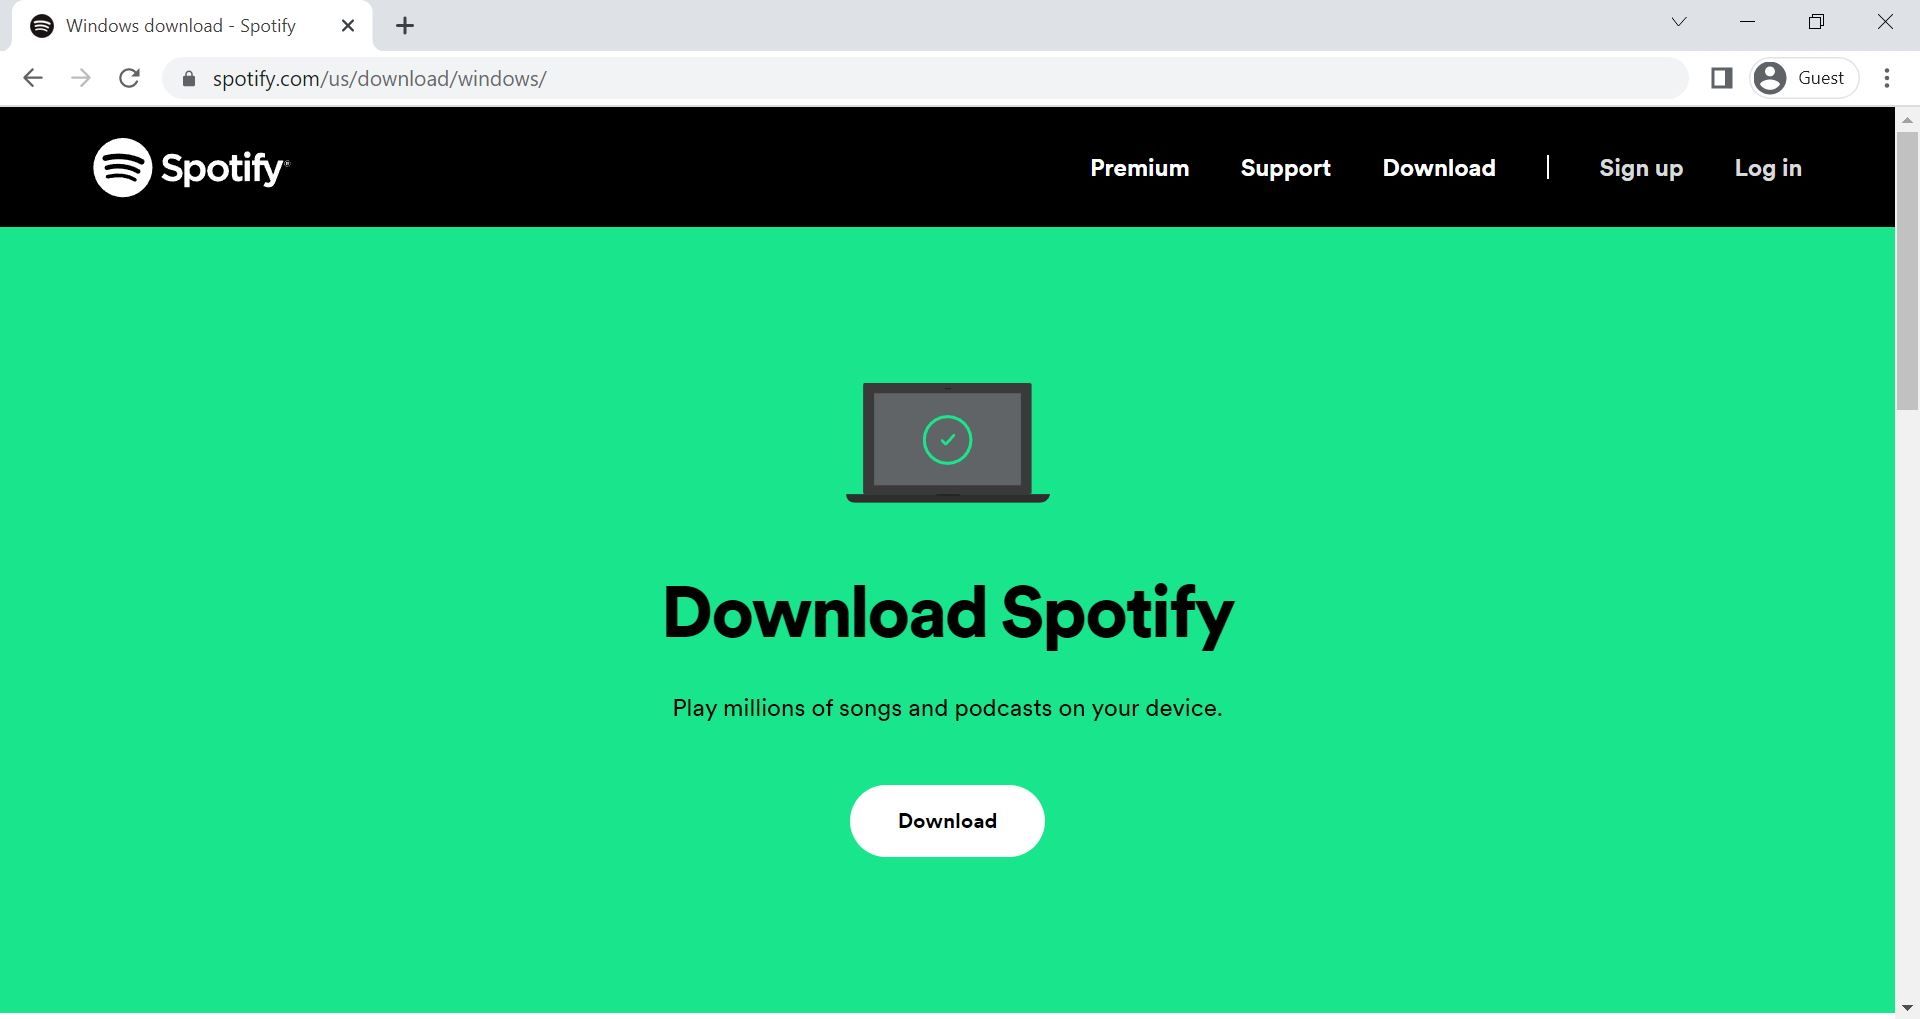 How to link Spotify to your Discord account